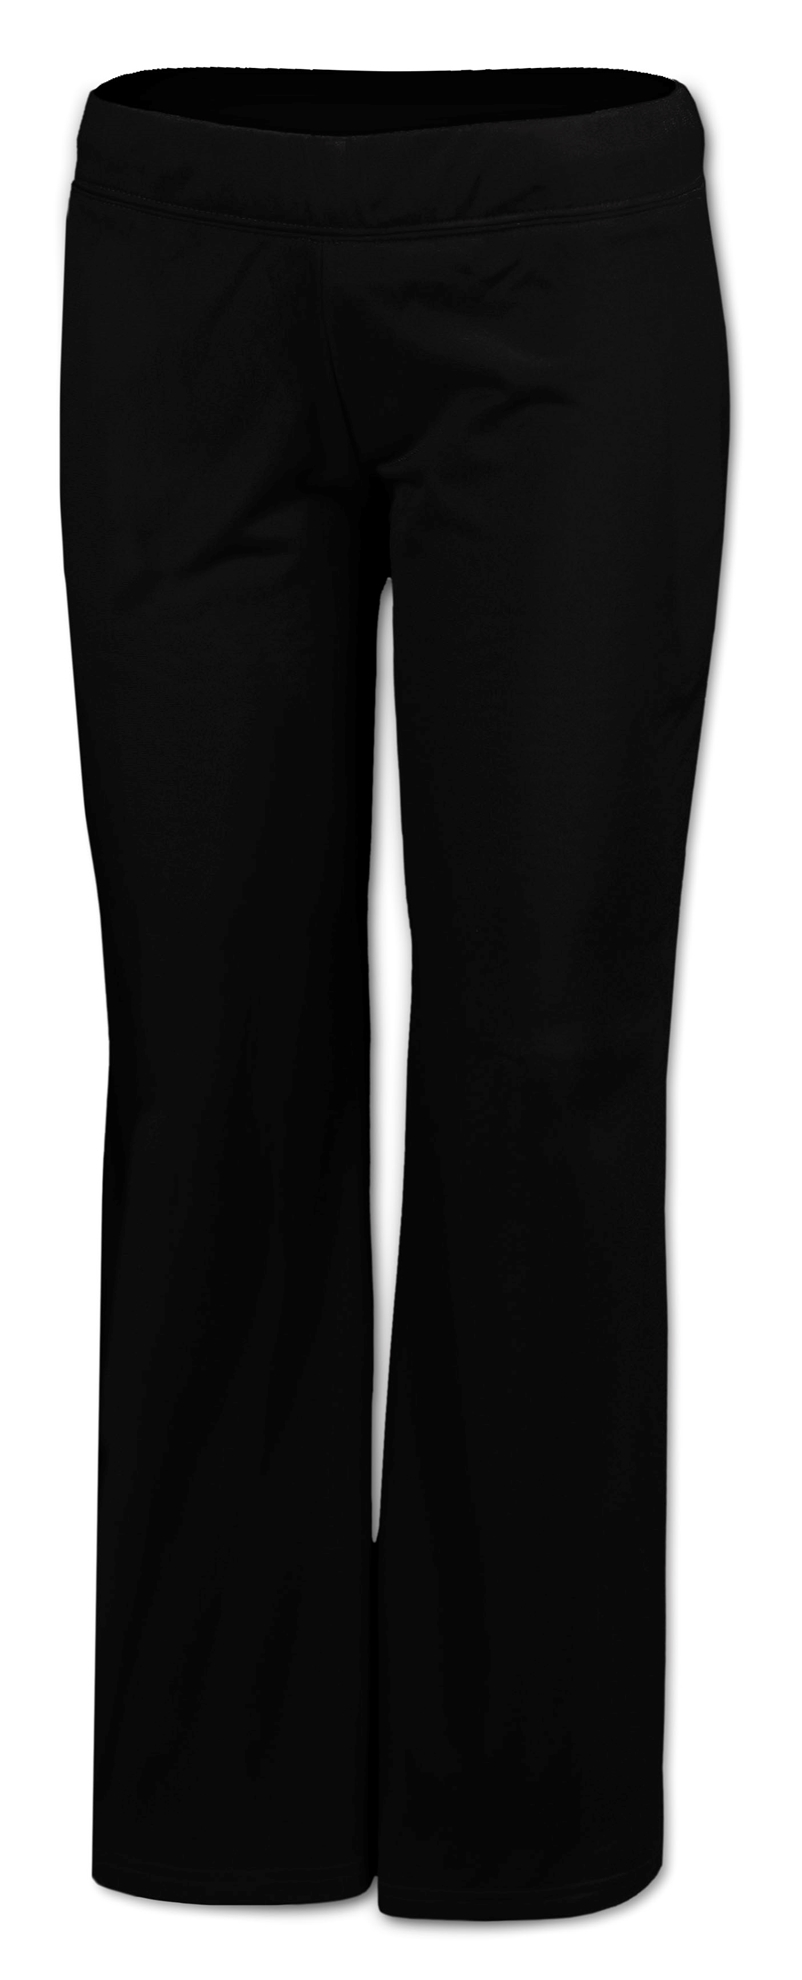 BAW Athletic Wear TC616 - Ladies Tricot Pant $17.85 - Activewear